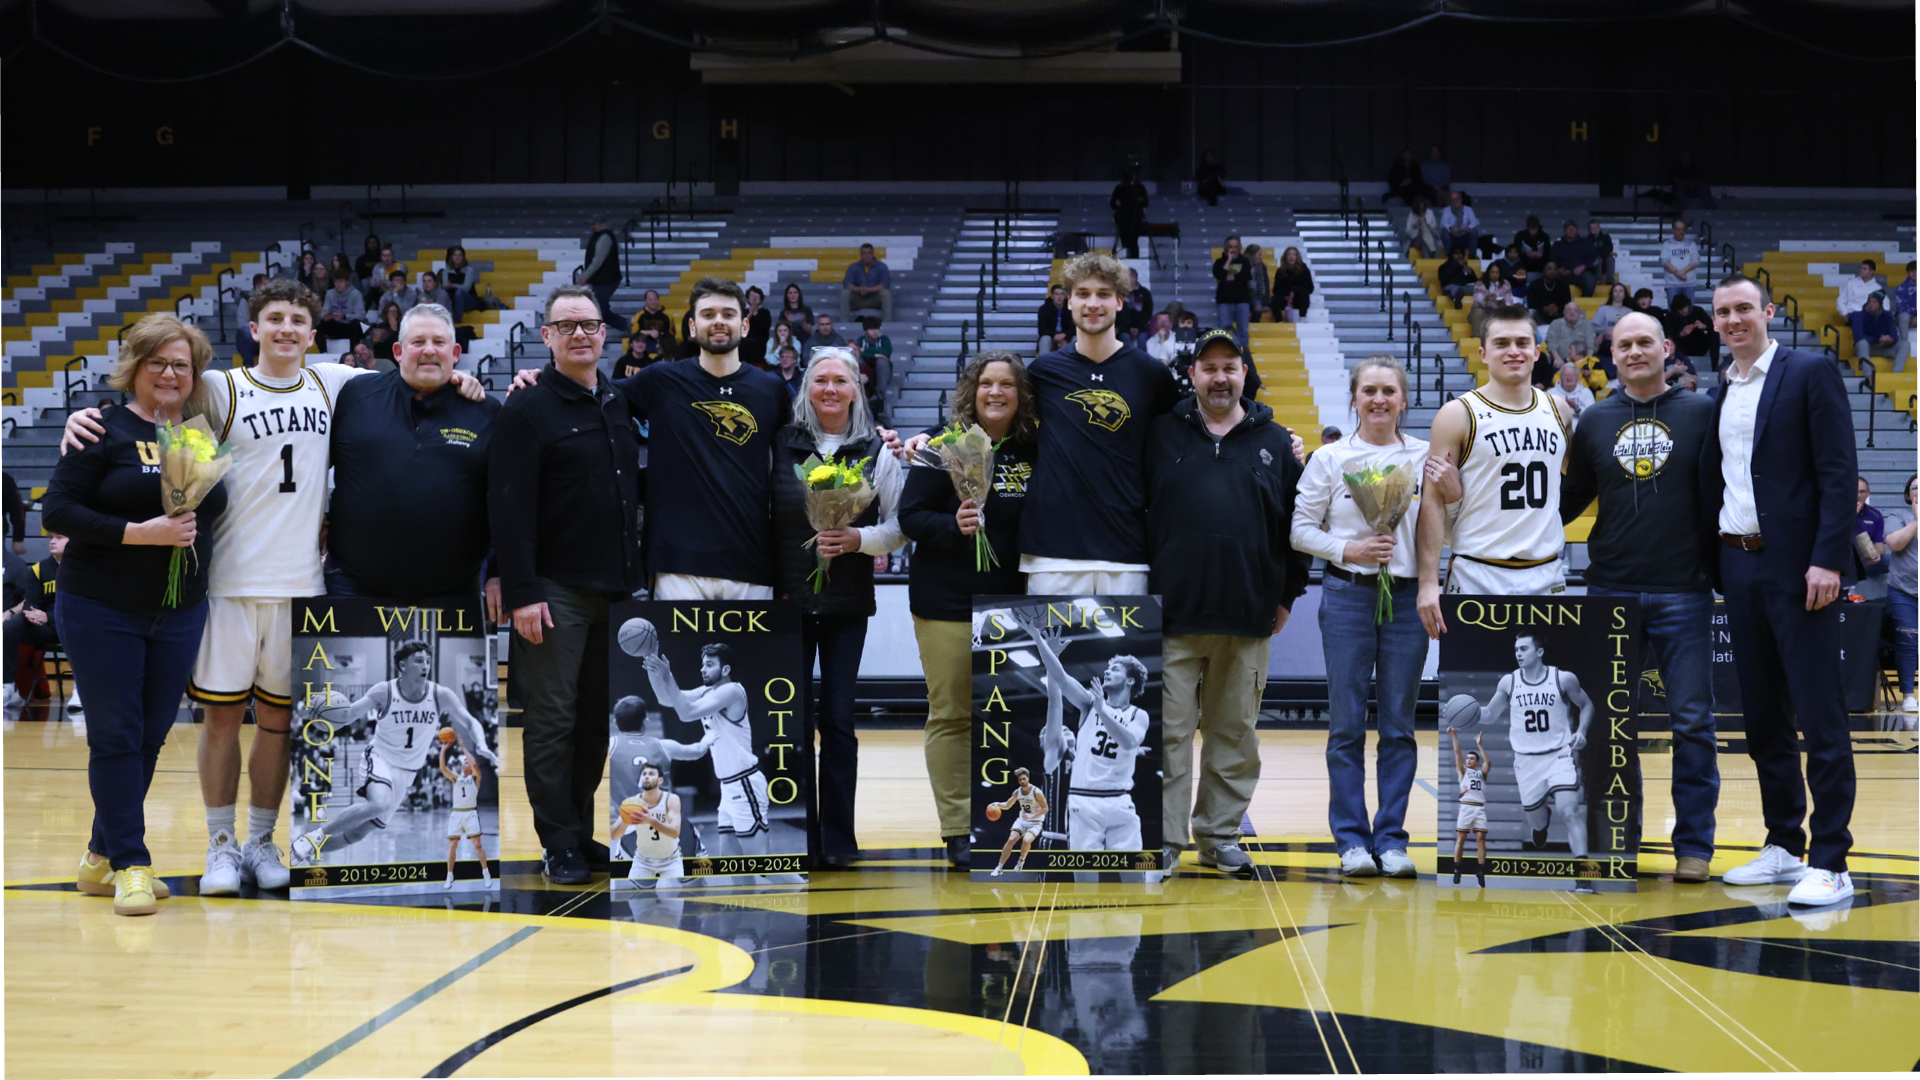 Seniors Will Mahoney, Nick Otto, Nick Spang, and Quinn Steckbauer were recognized before the game as the 2024 graduating class.